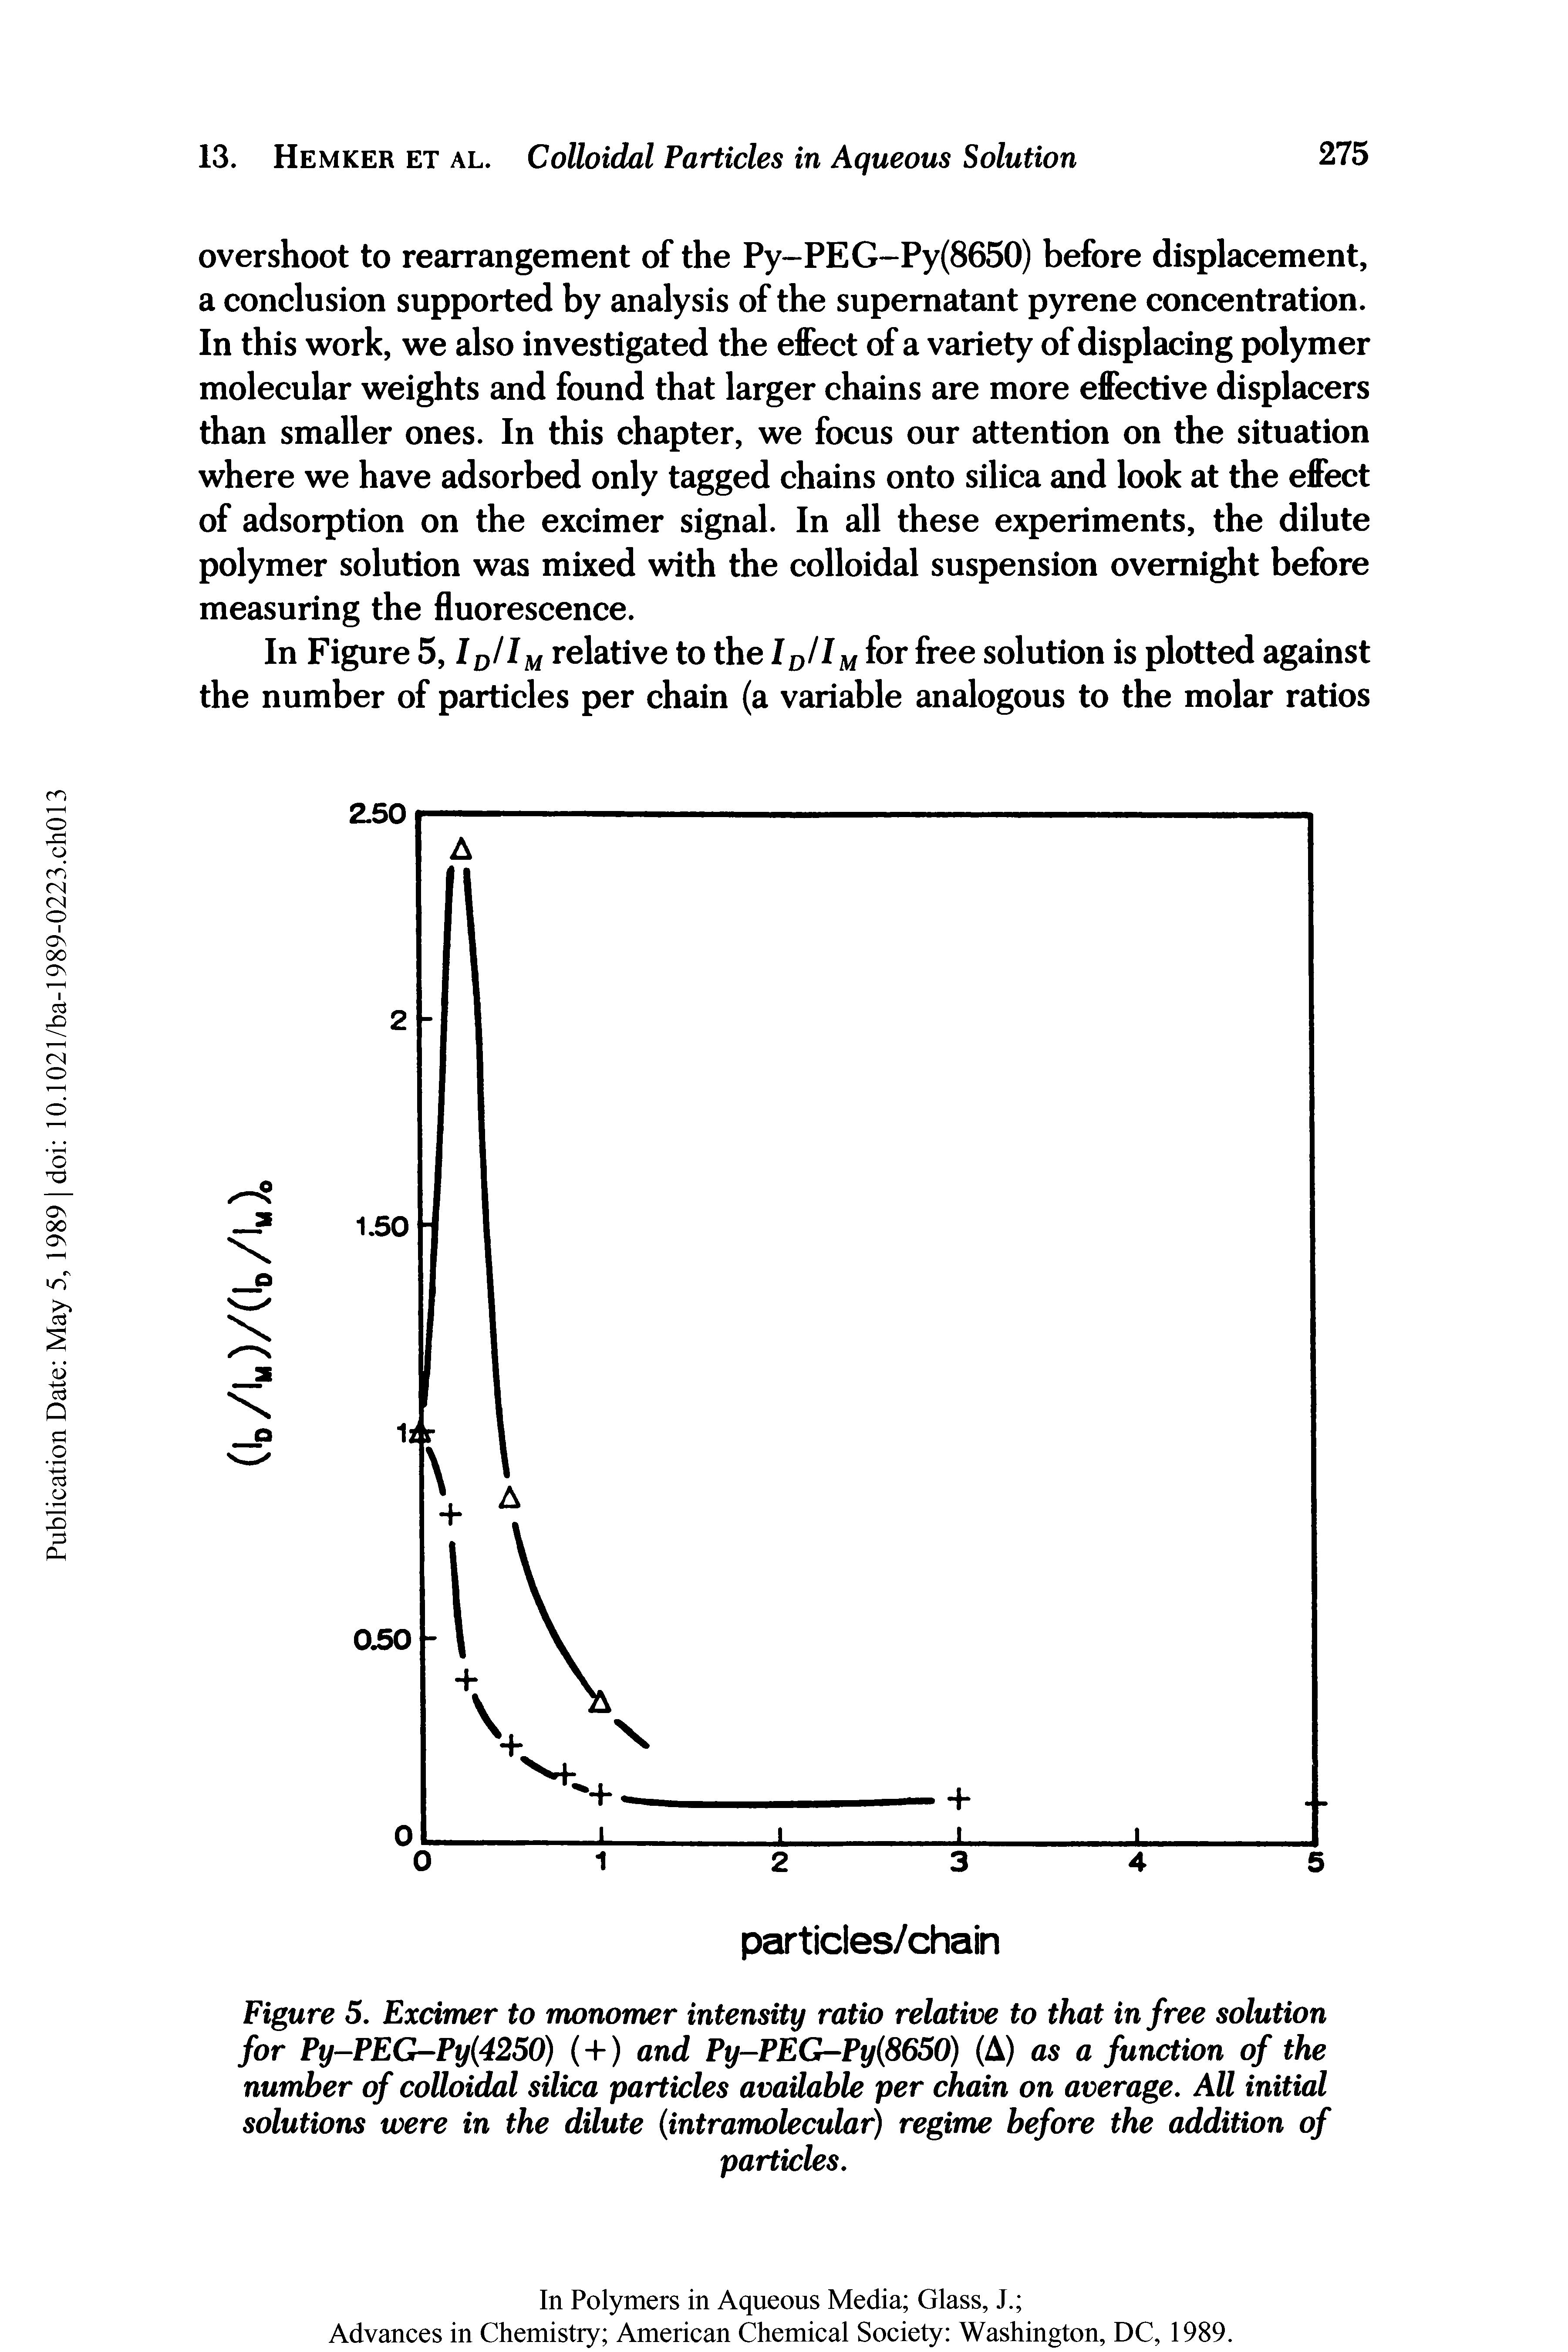 Figure 5. Excimer to monomer intensity ratio relative to that in free solution for Py-PEG-Py 4250) (+) and Py-PEG-Py 8650) (A) as a function of the number of colloidal silica particles available per chain on average. All initial solutions were in the dilute (intramolecular) regime before the addition of...